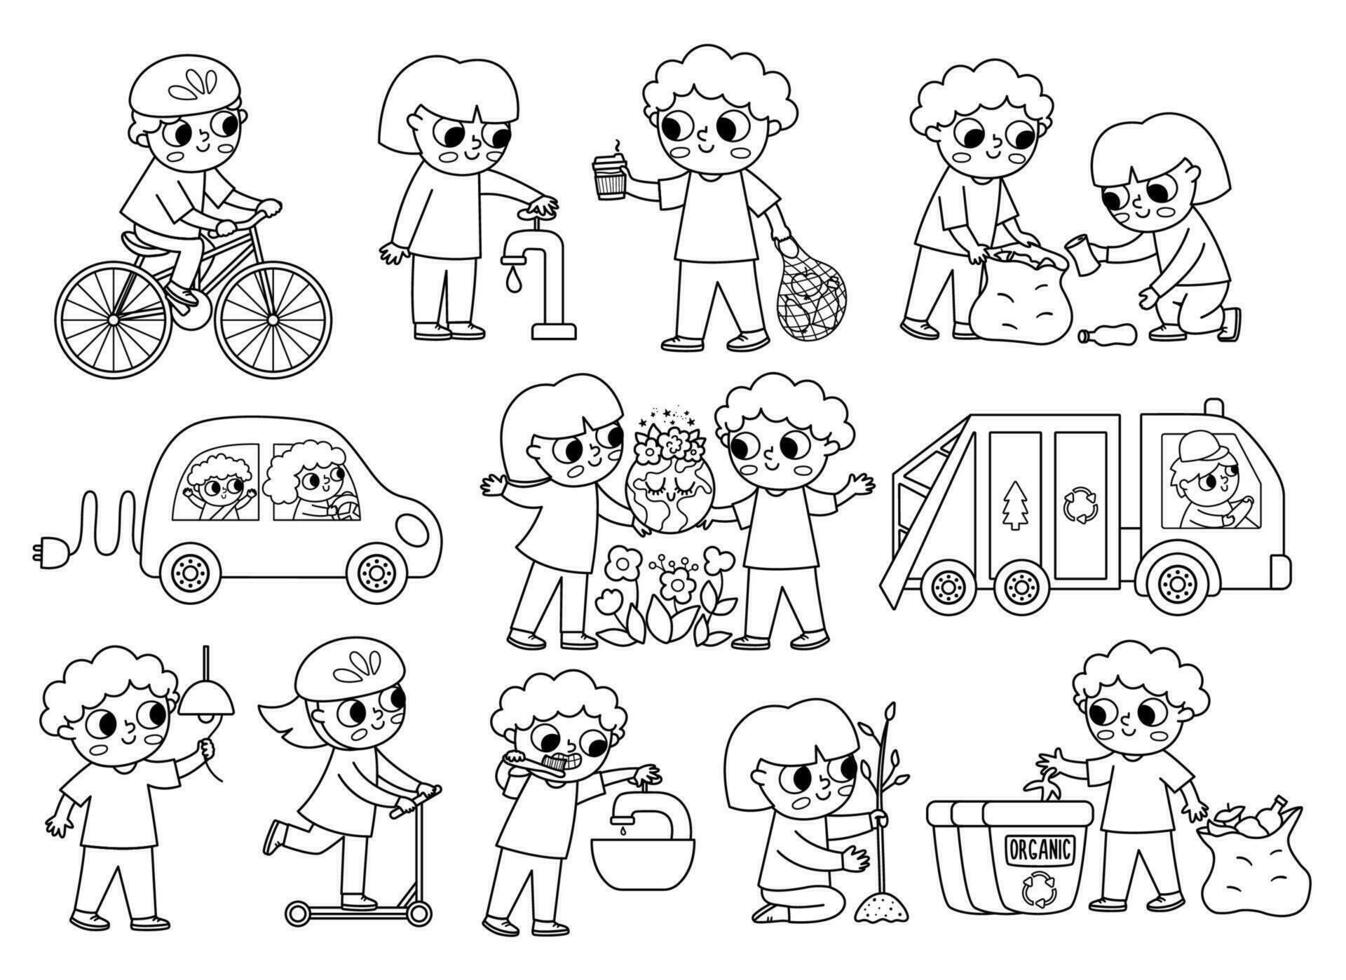 Ecological black and white vector set with children. Cute line eco friendly kids collection. Boys and girls saving water, energy, seeding plants, caring of environment. Earth day coloring page